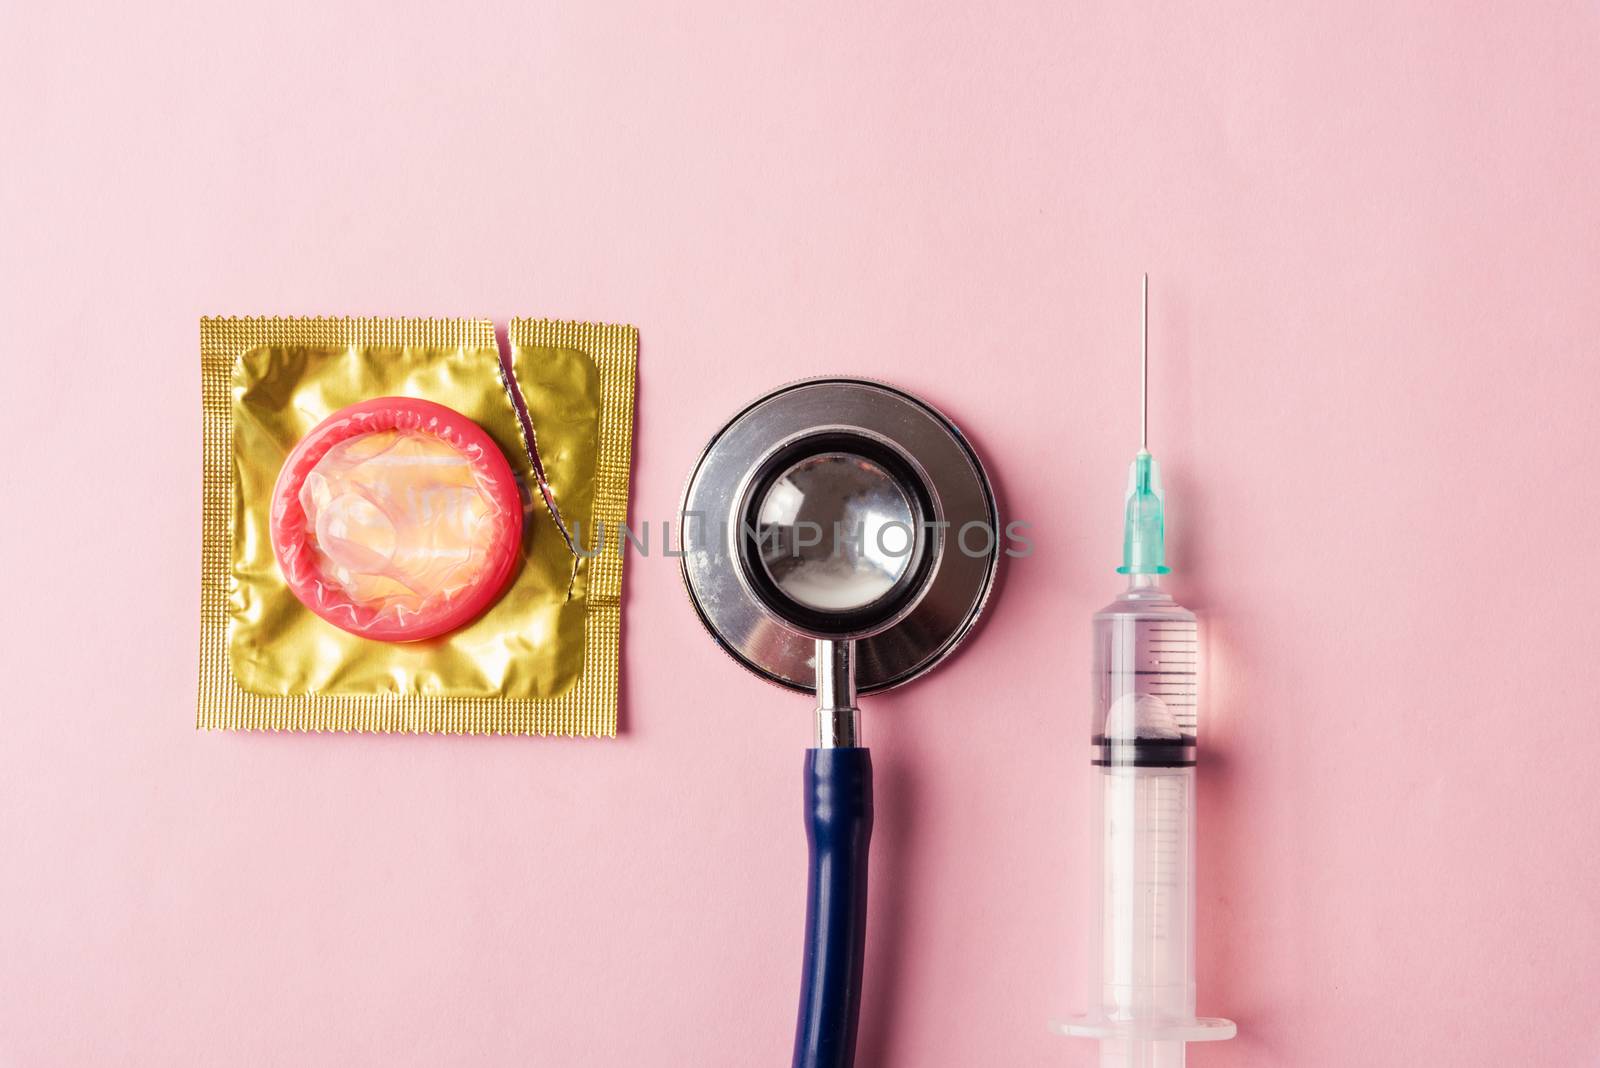 World sexual health or Aids day, Top view flat lay medical equipment, condom in pack and stethoscope, studio shot isolated on a pink background, Safe sex and reproductive health concept